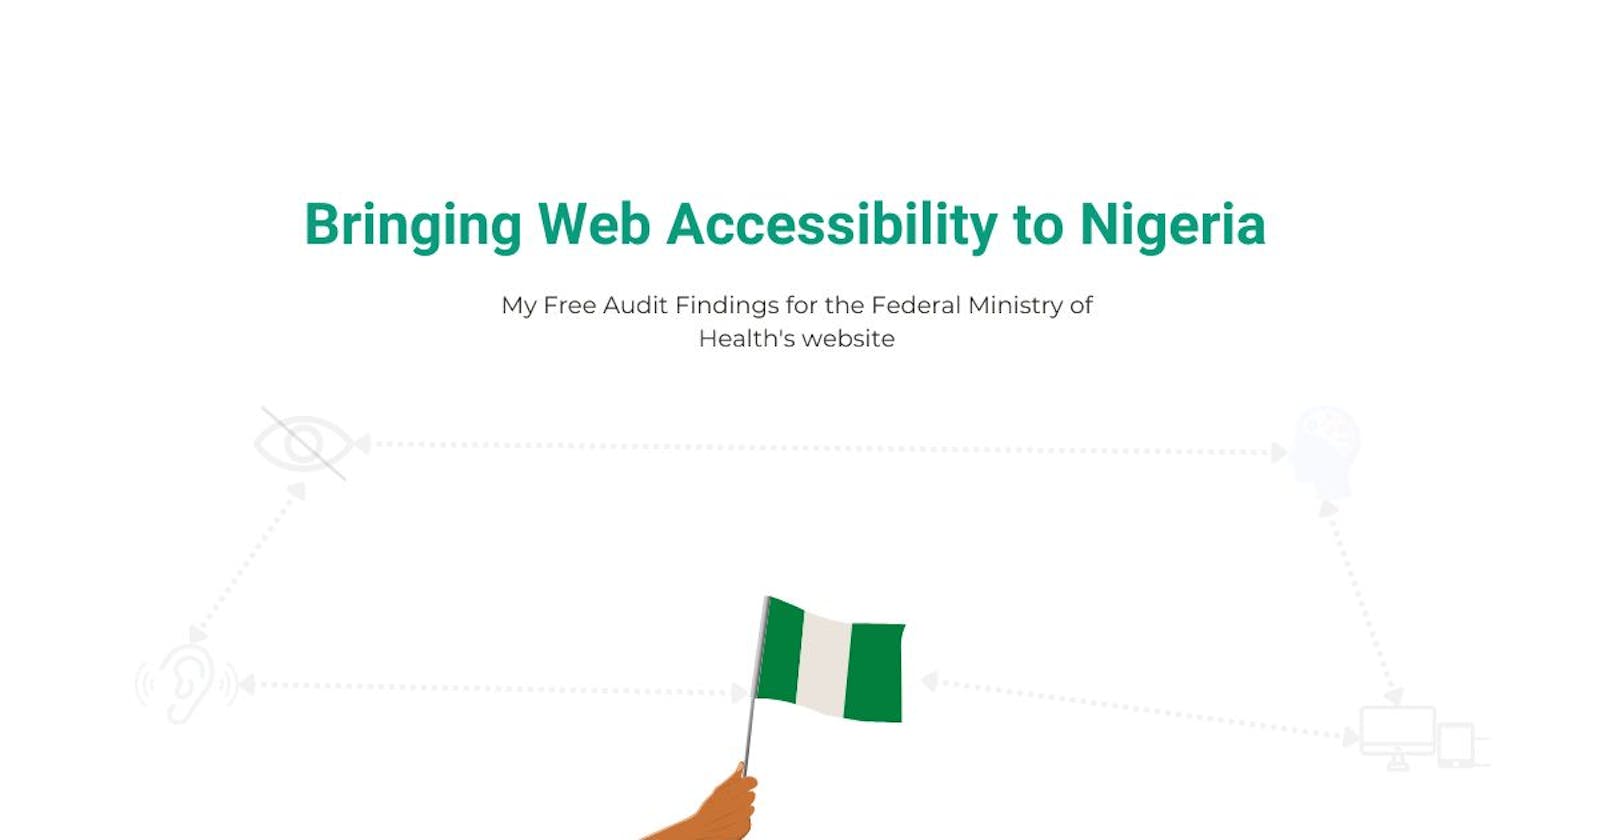 Bringing Web Accessibility to Nigeria: My Free Audit Findings for the Federal Ministry of Health's website